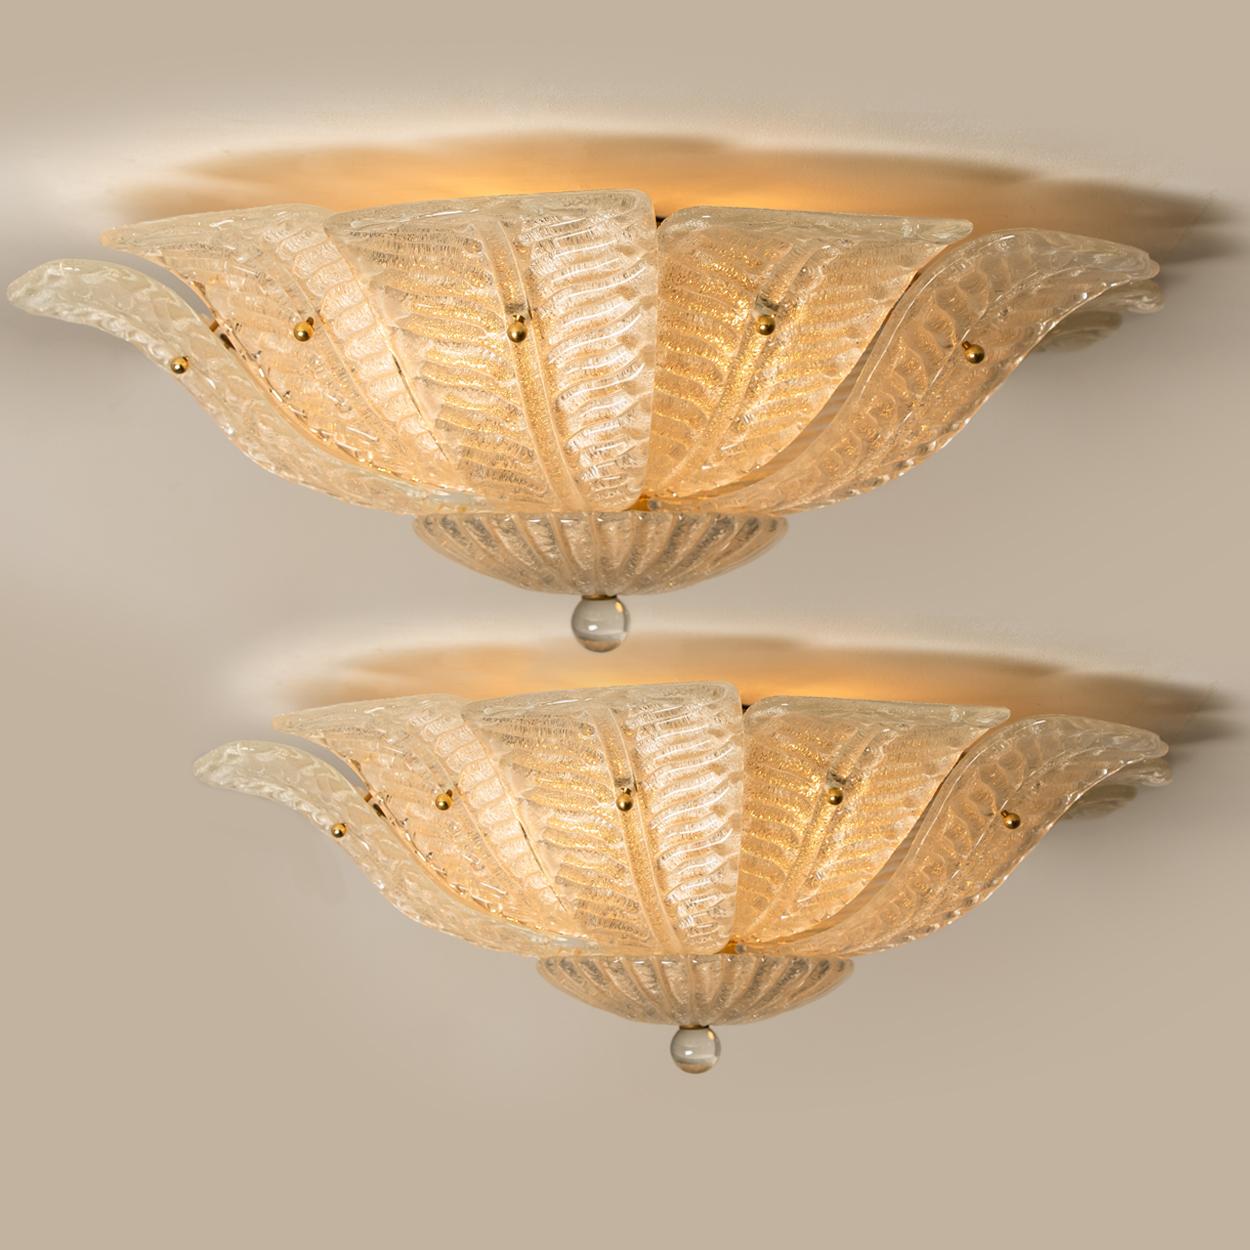 An elegant hand blown Murano glass flushmount of Barovier & Toso. The light fixture consists 16 blown Murano glass leaves. Mounted on a brass frame. The leaves refract light beautifully. The flushmount fills the room with a soft, warm and welcoming